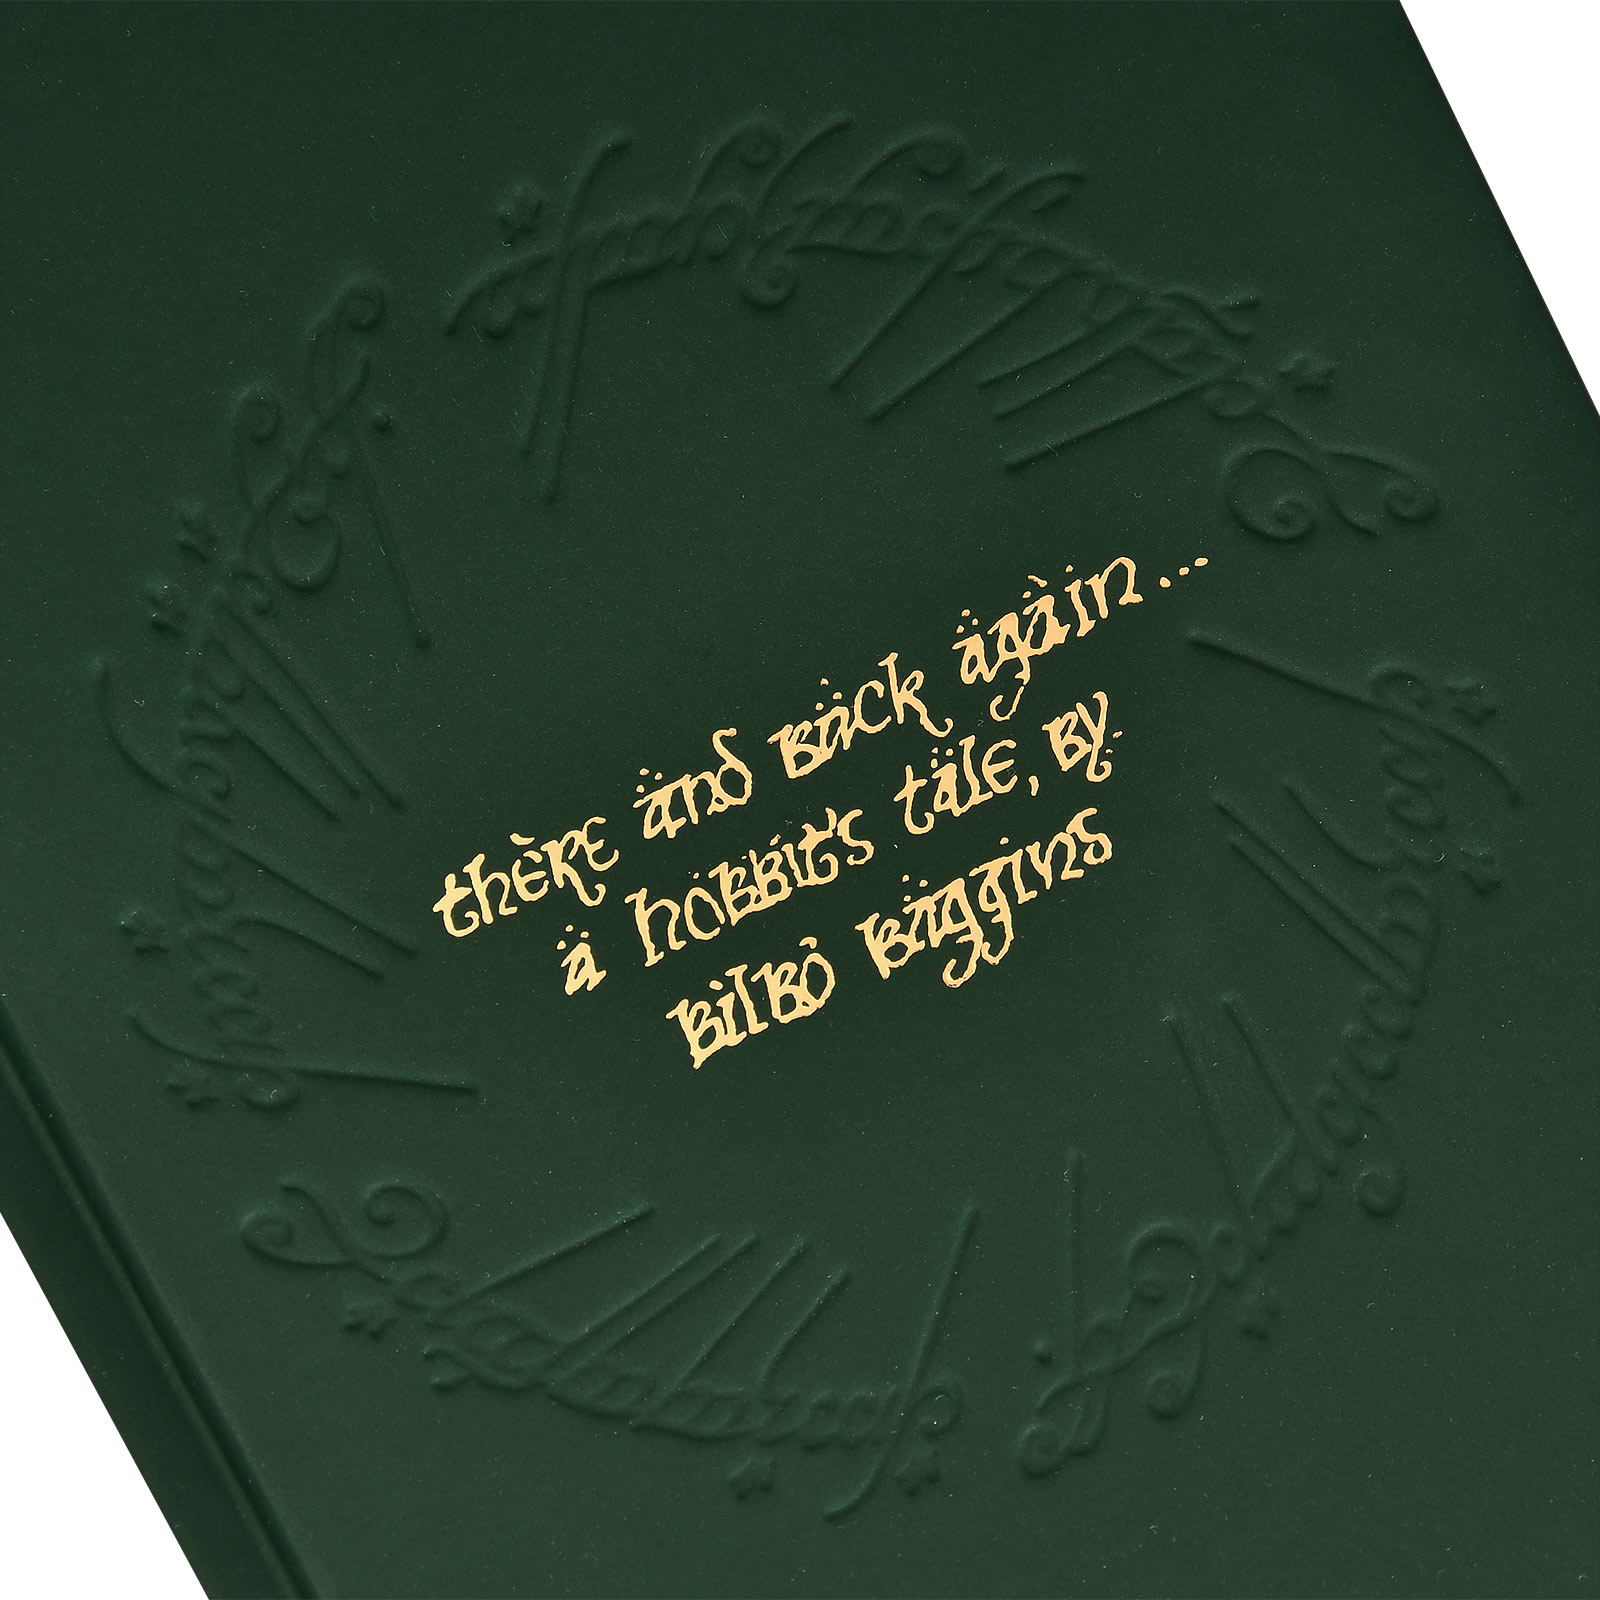 Lord of the Rings - Bilbo The Hobbit Notebook A5